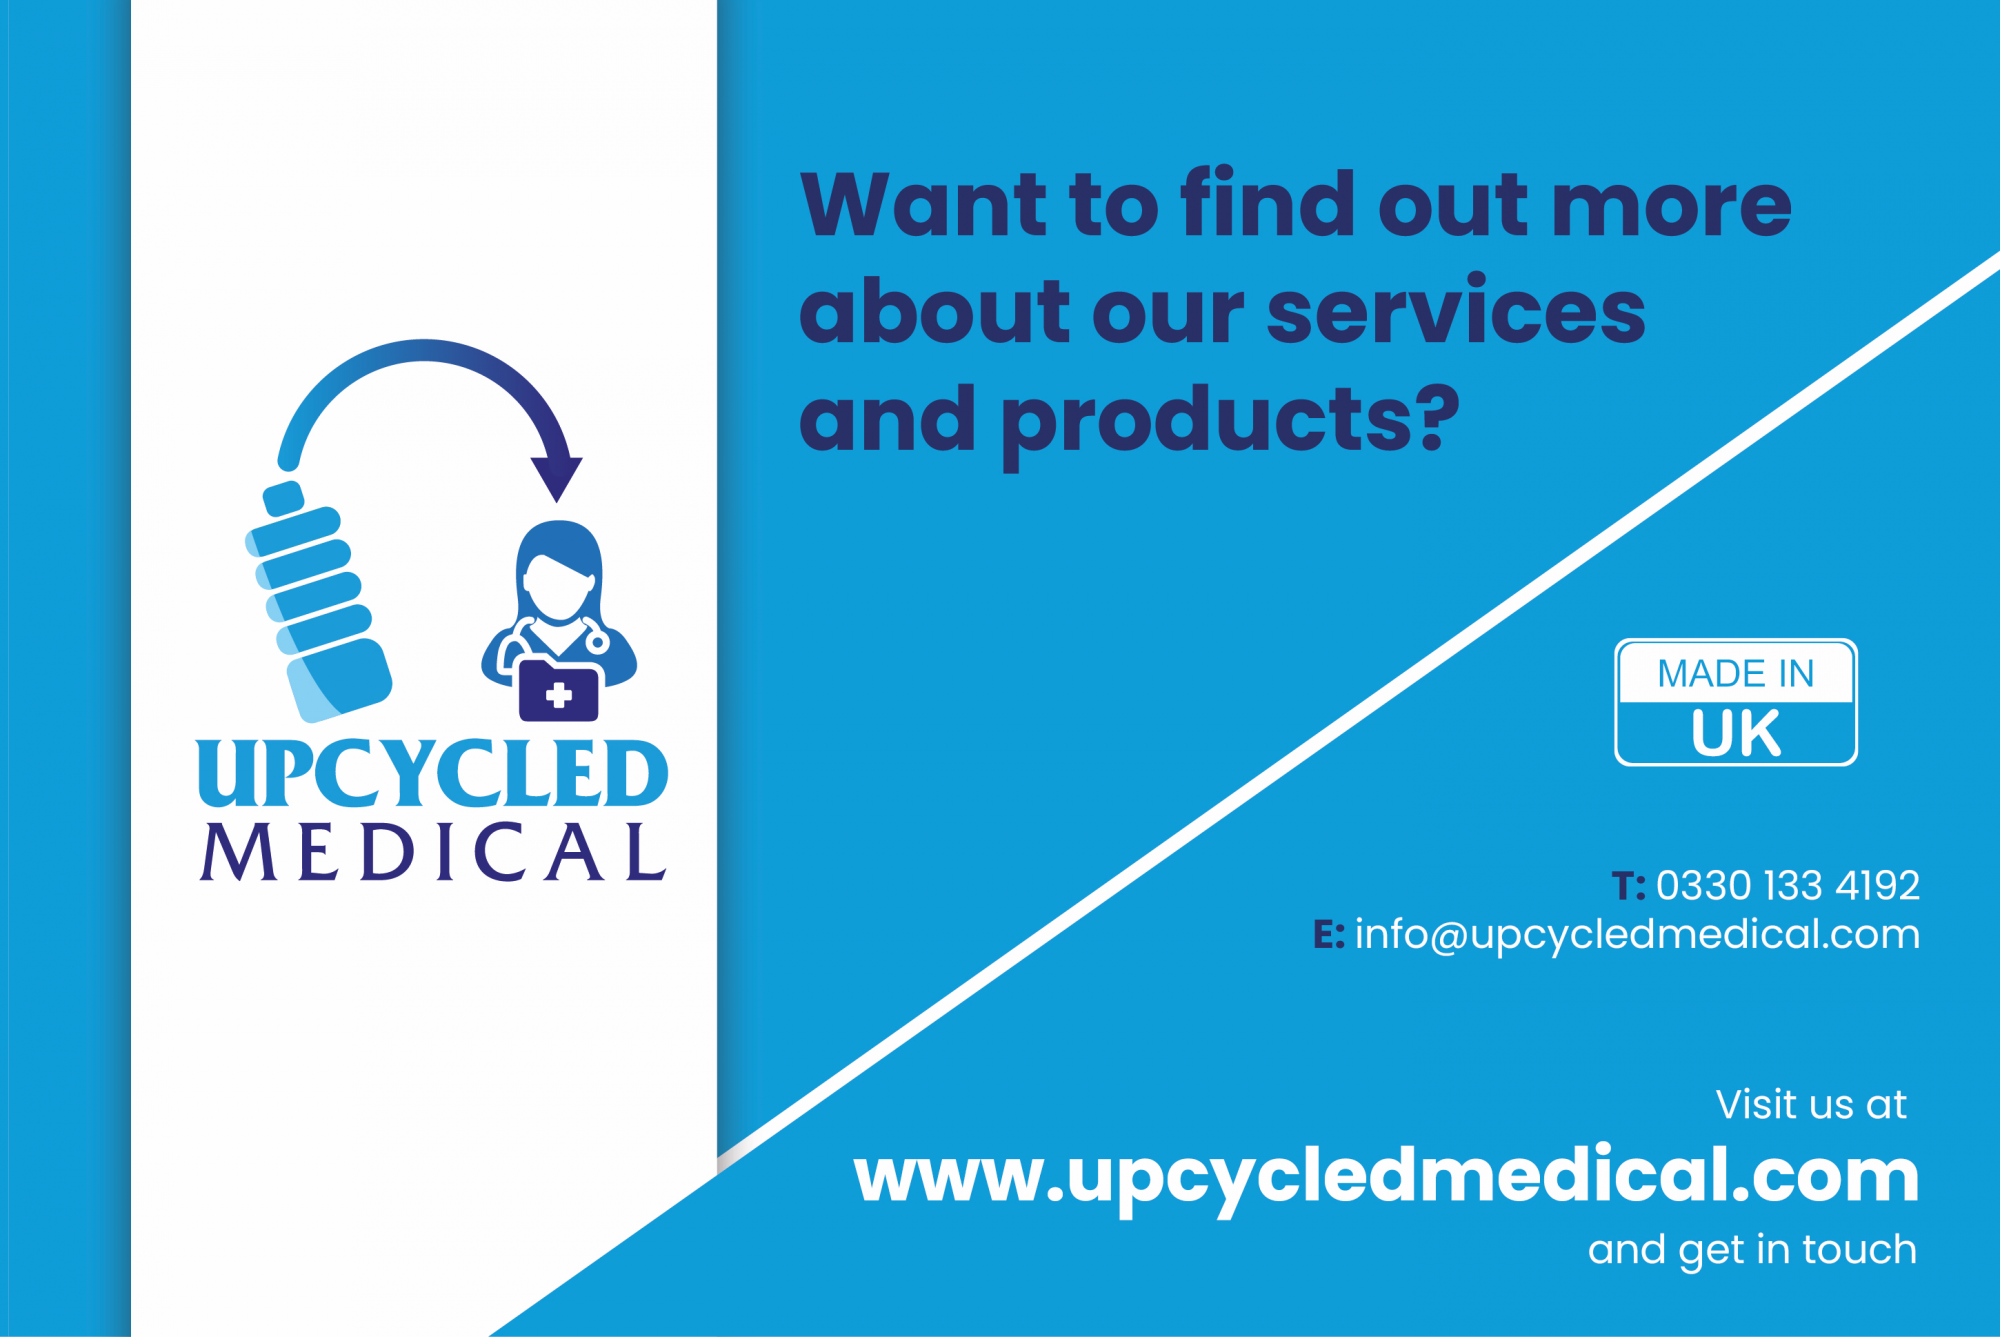 Upcycled Medical Ltd contact 